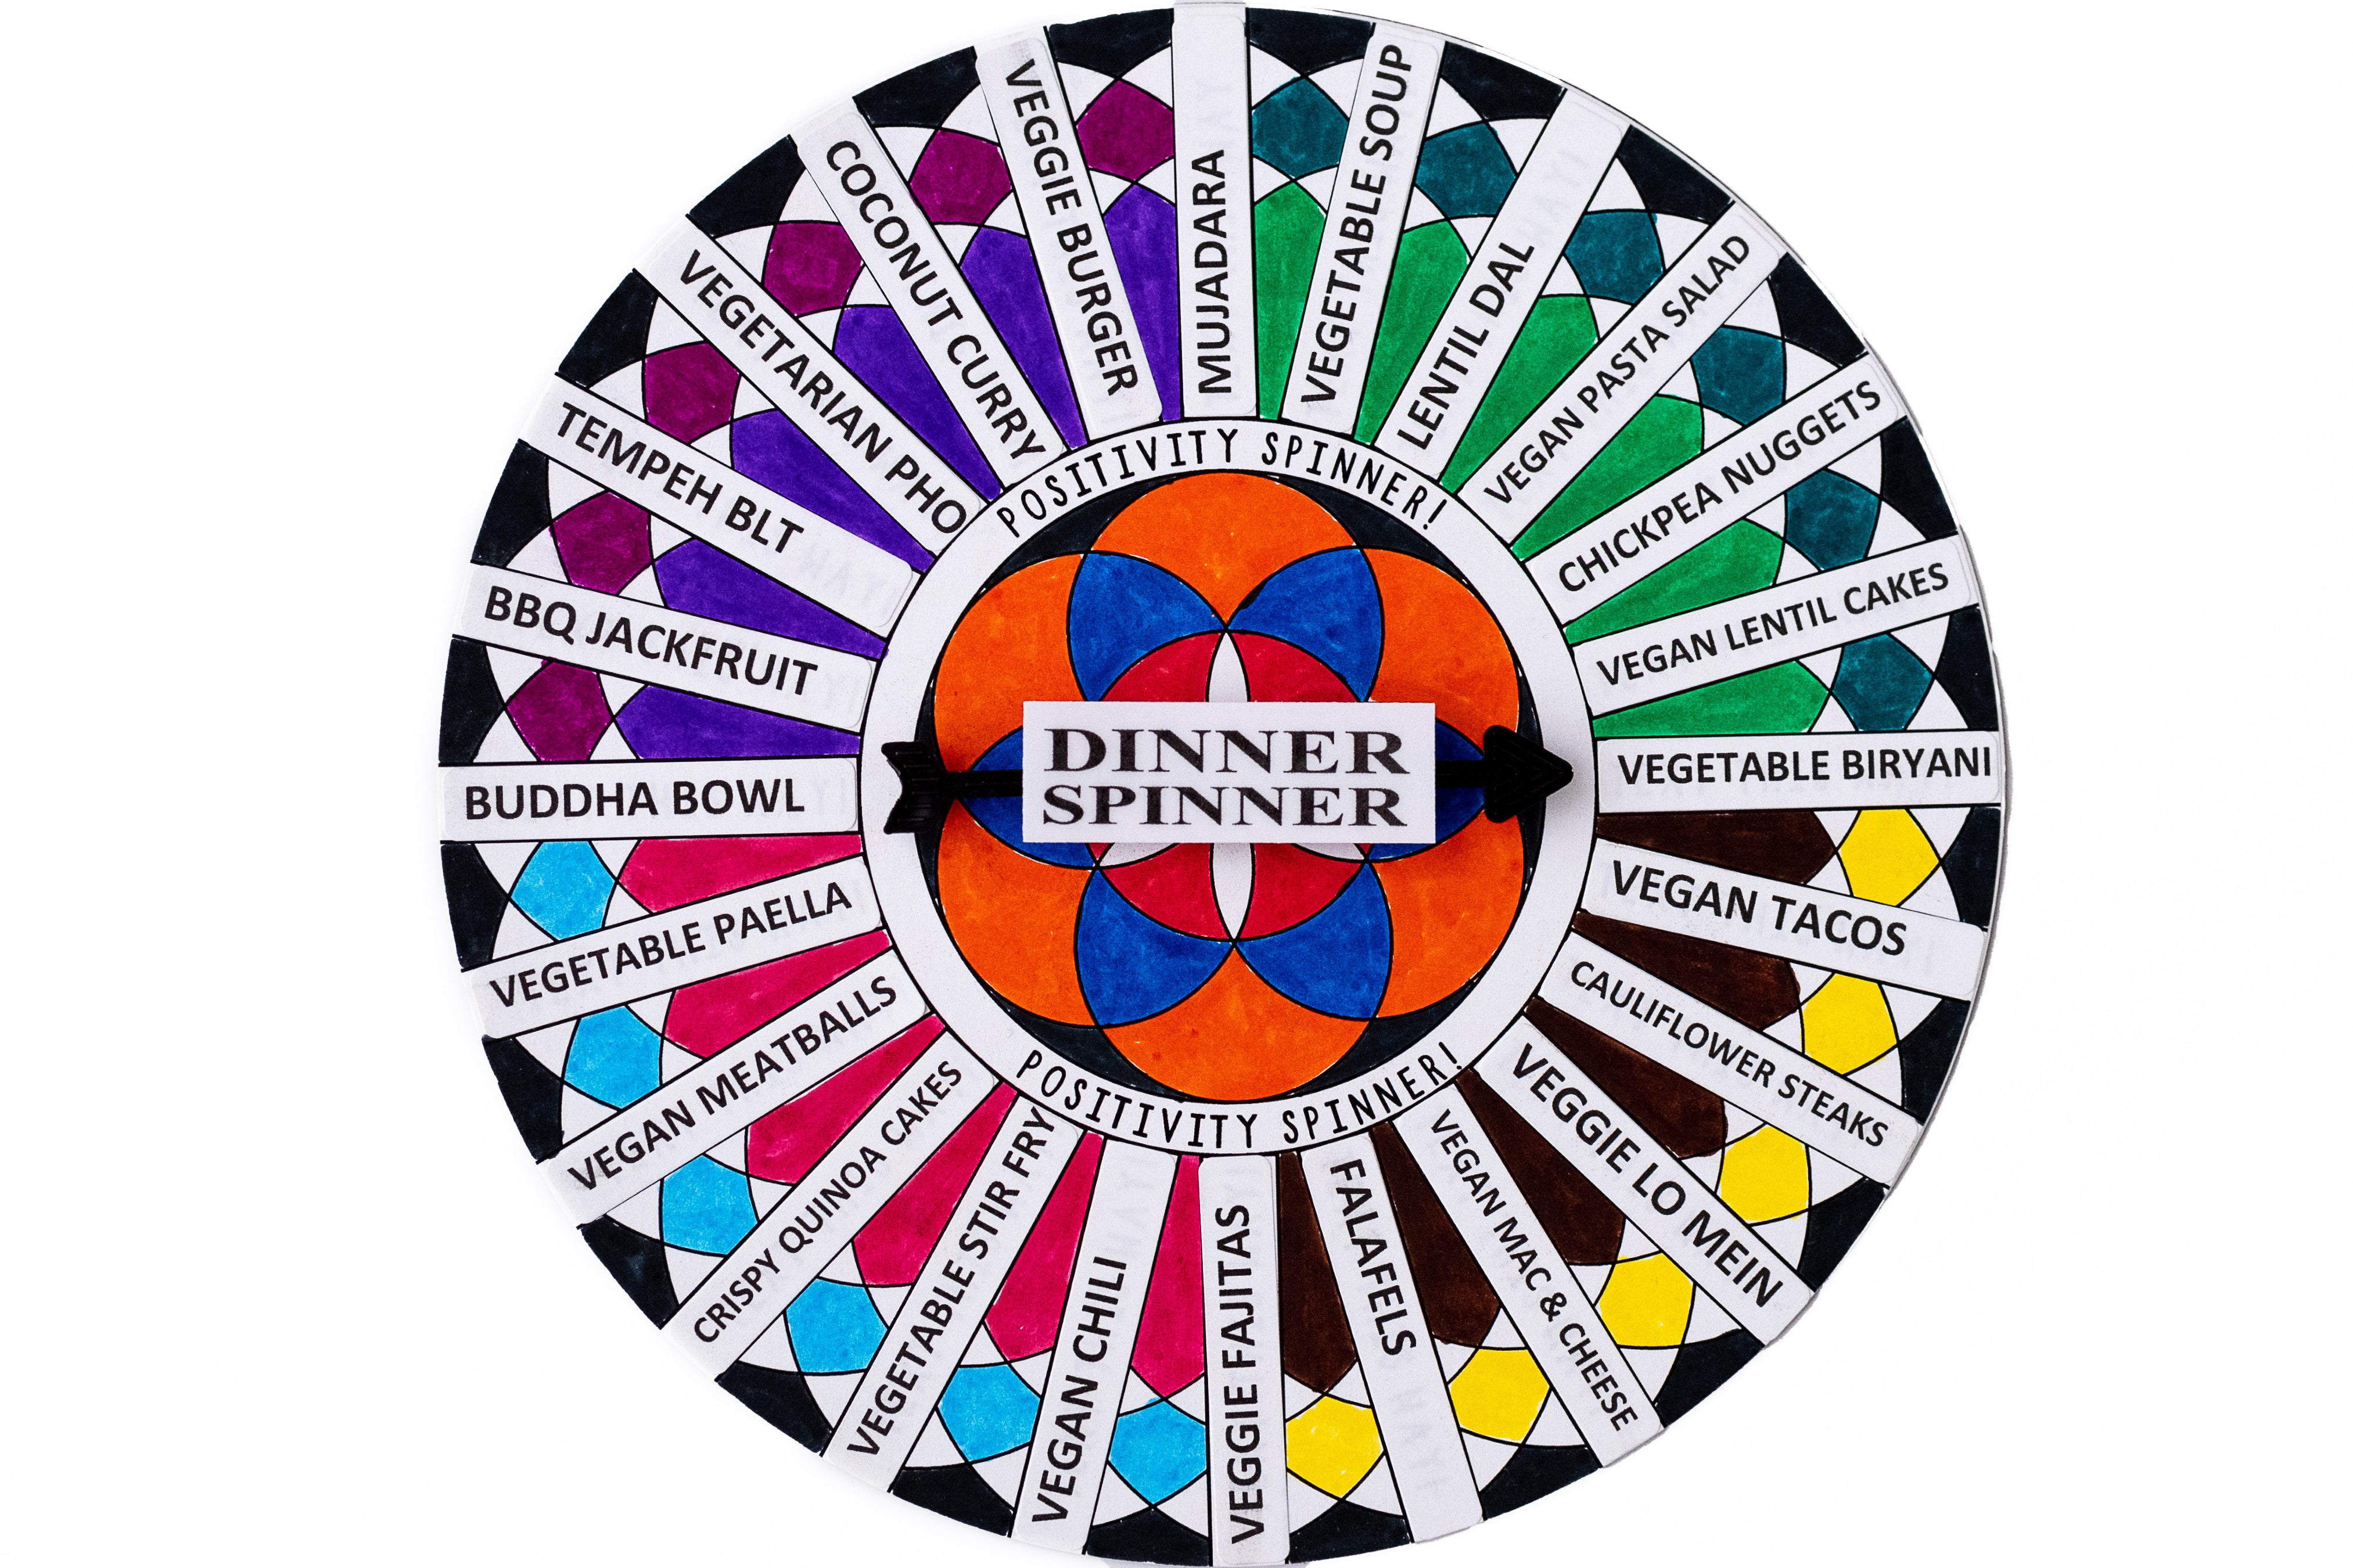 Color the design, add your favorite recipes from the 88 choices, and let the Dinner Spinner decide what to eat!